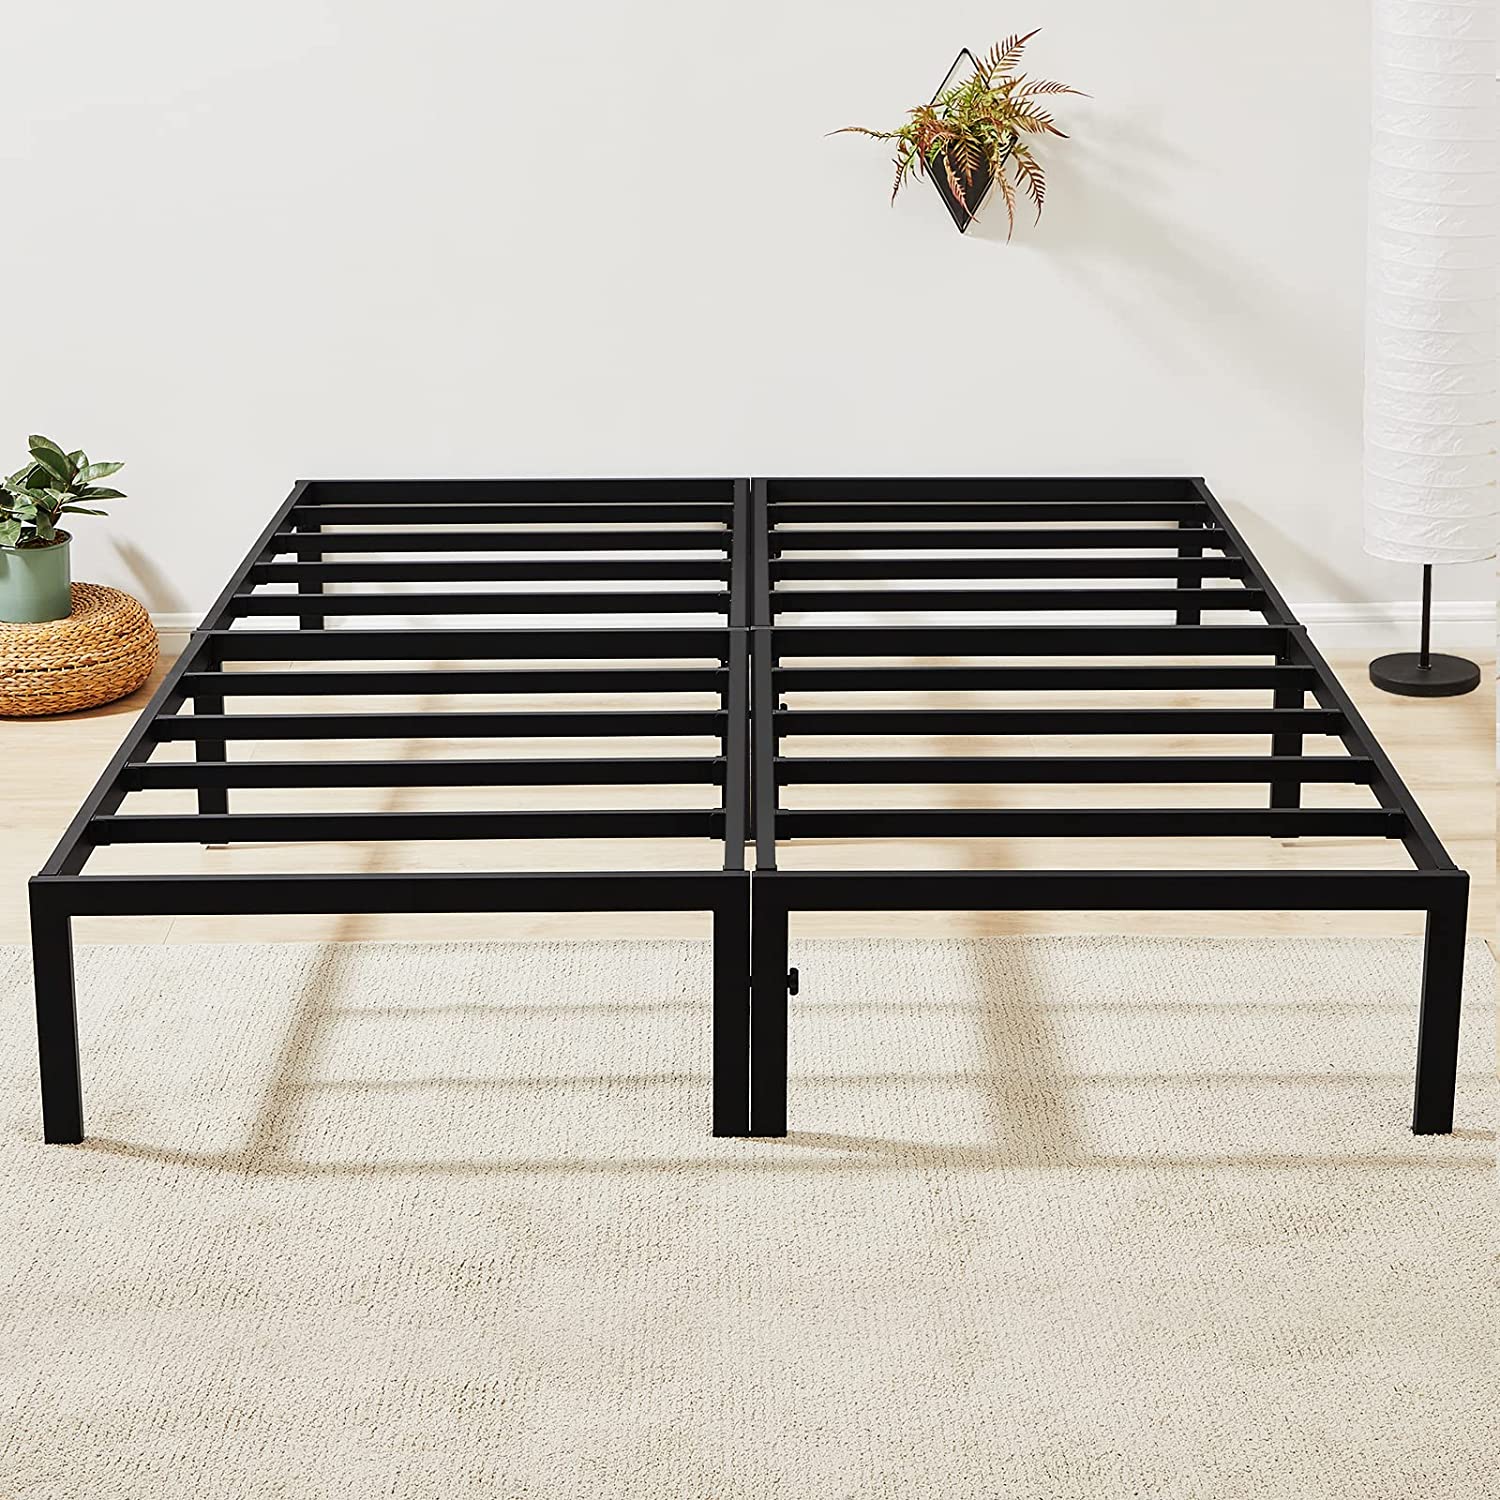 GreenForest Twin Bed Frame Tool-Free Assembly Metal Platform, Twin Size Heavy Du